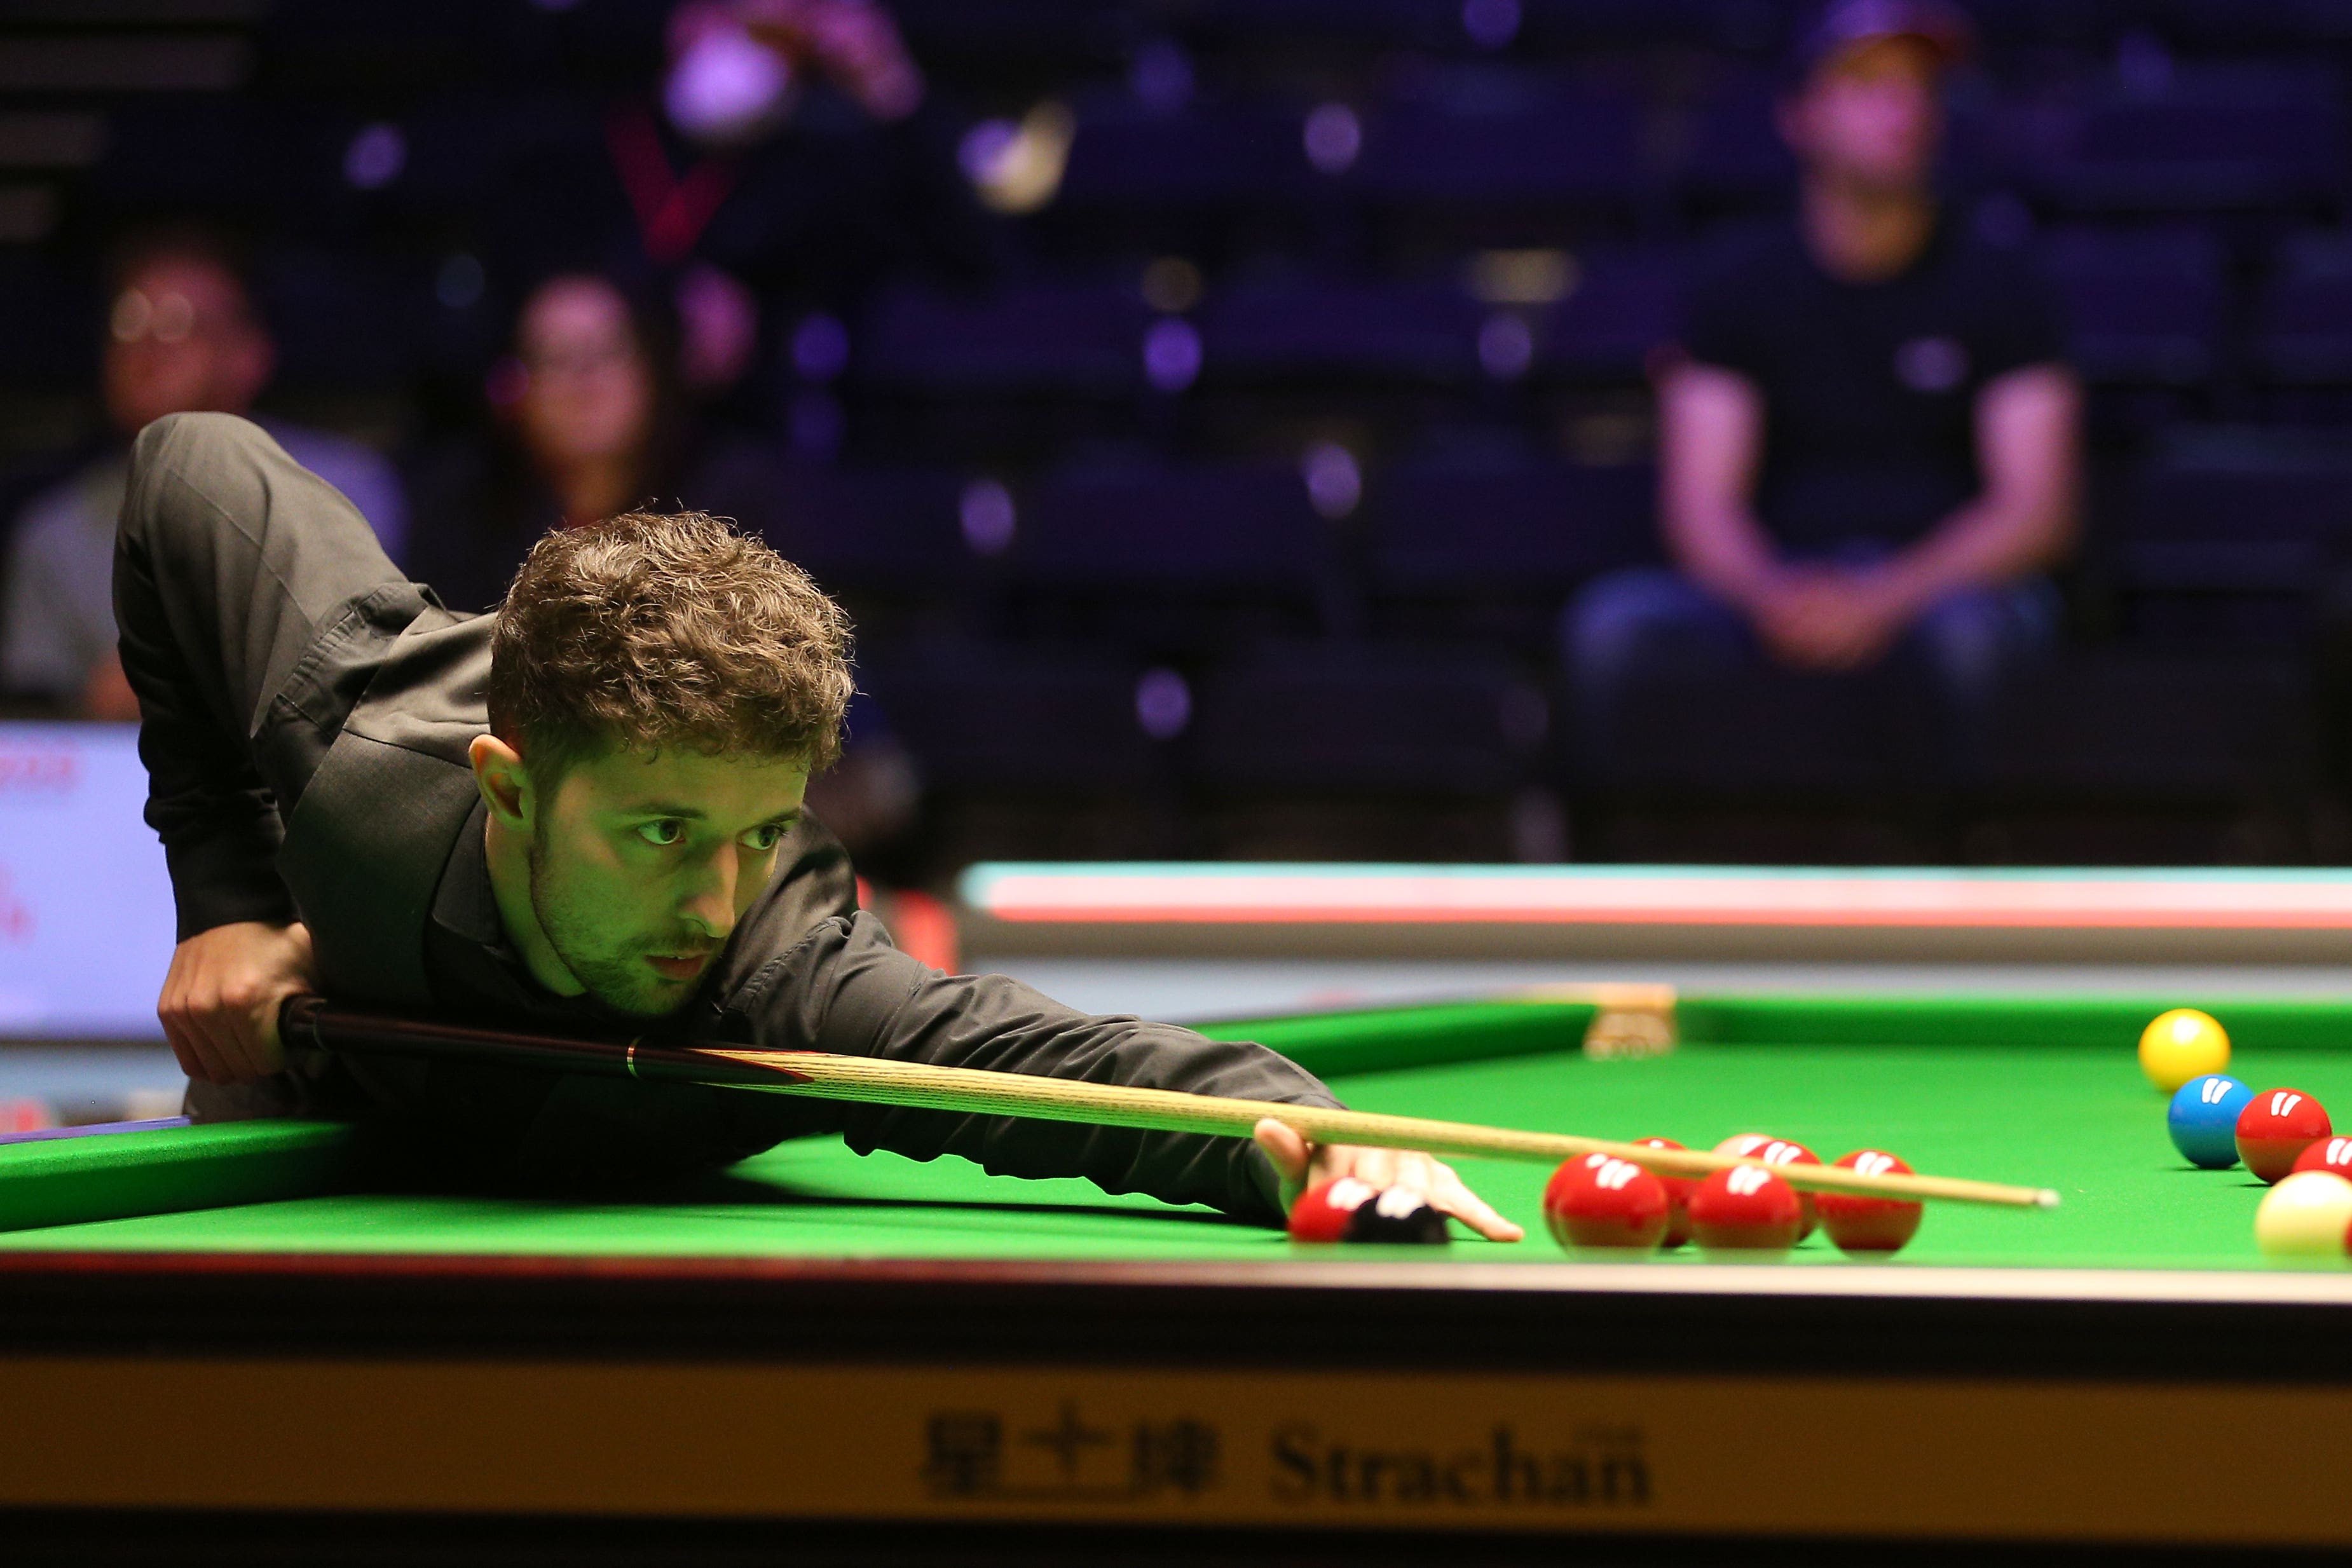 Joe OConnor upsets Neil Robertson to book place in Scottish Open final The Independent